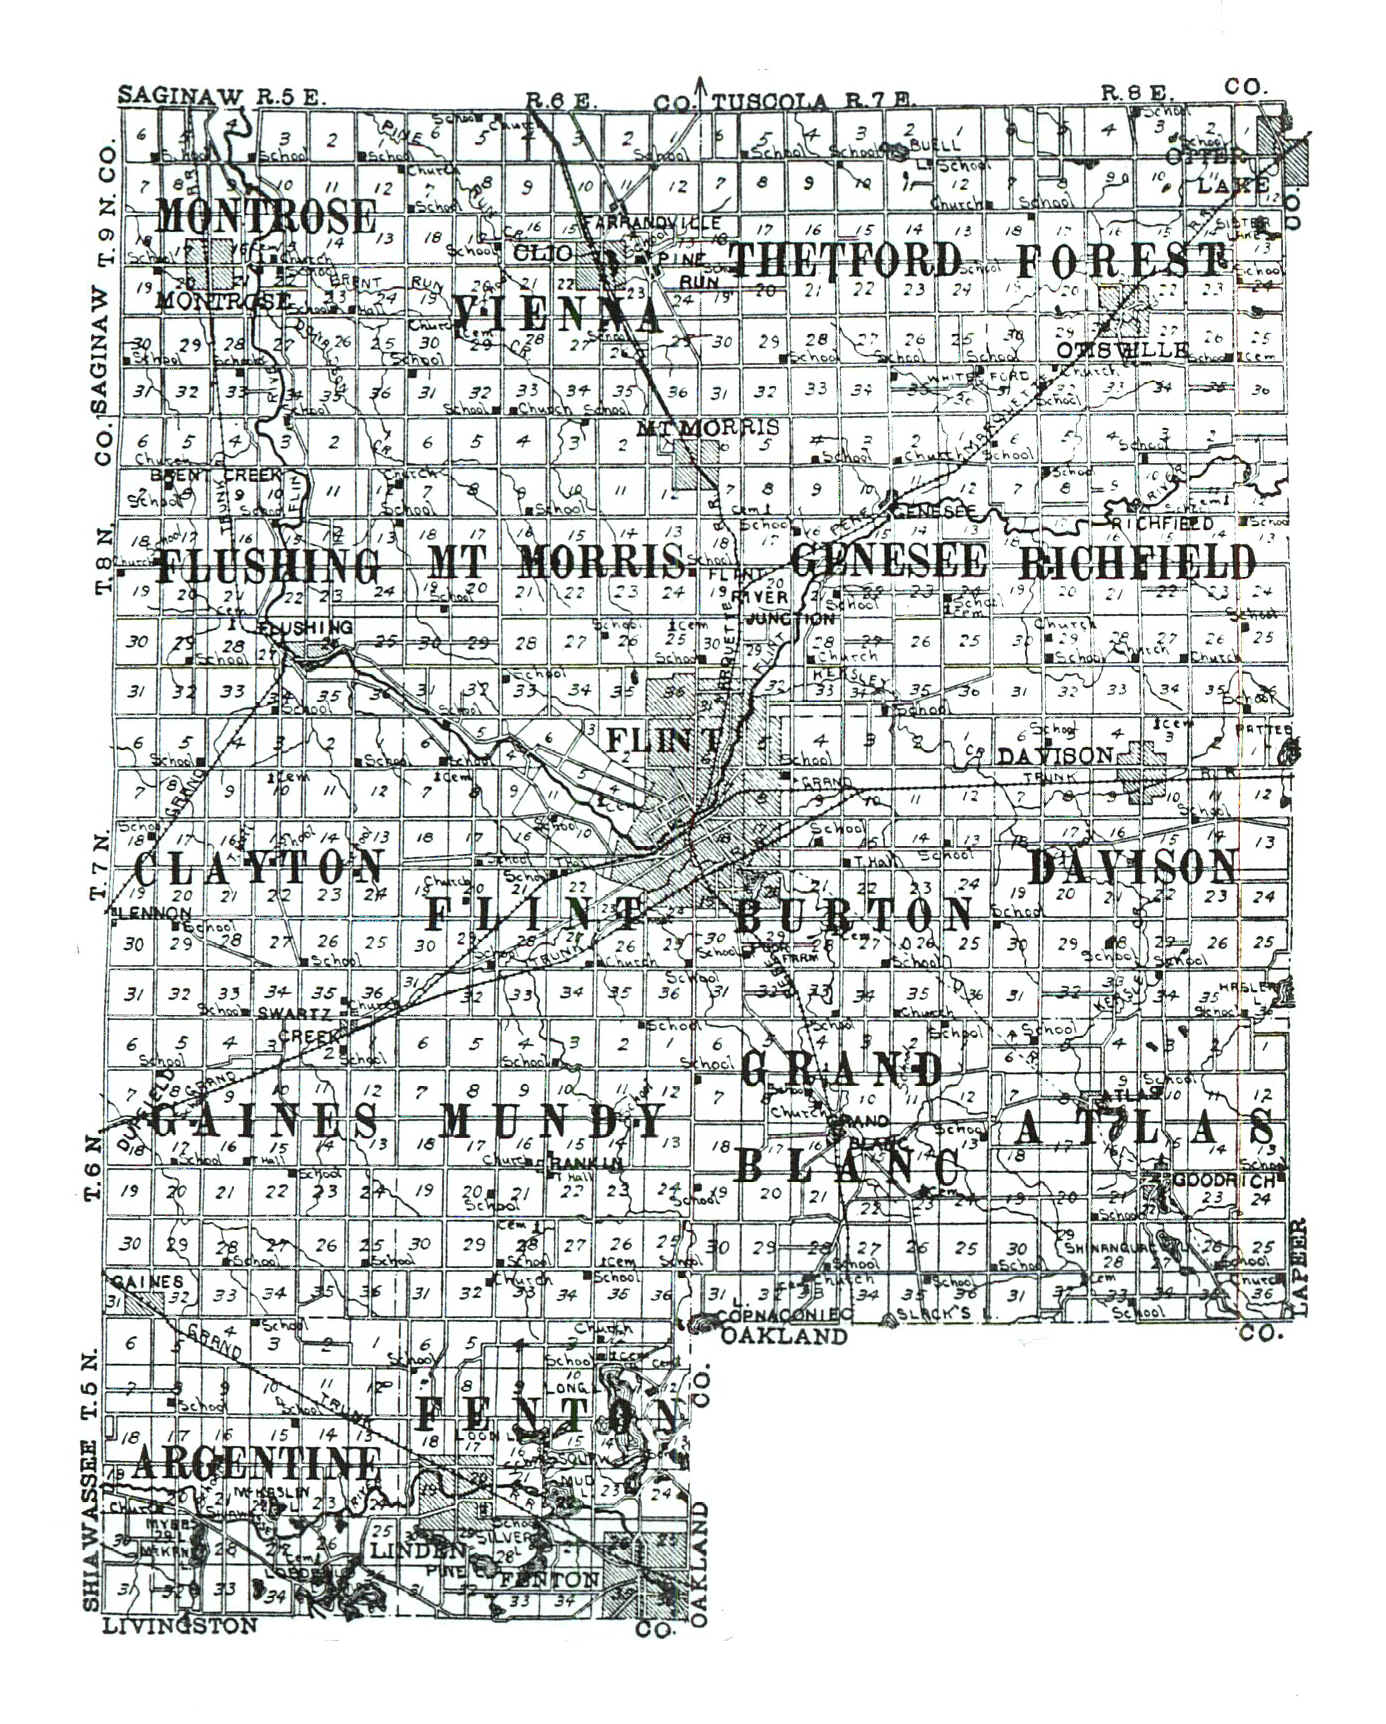 Township map